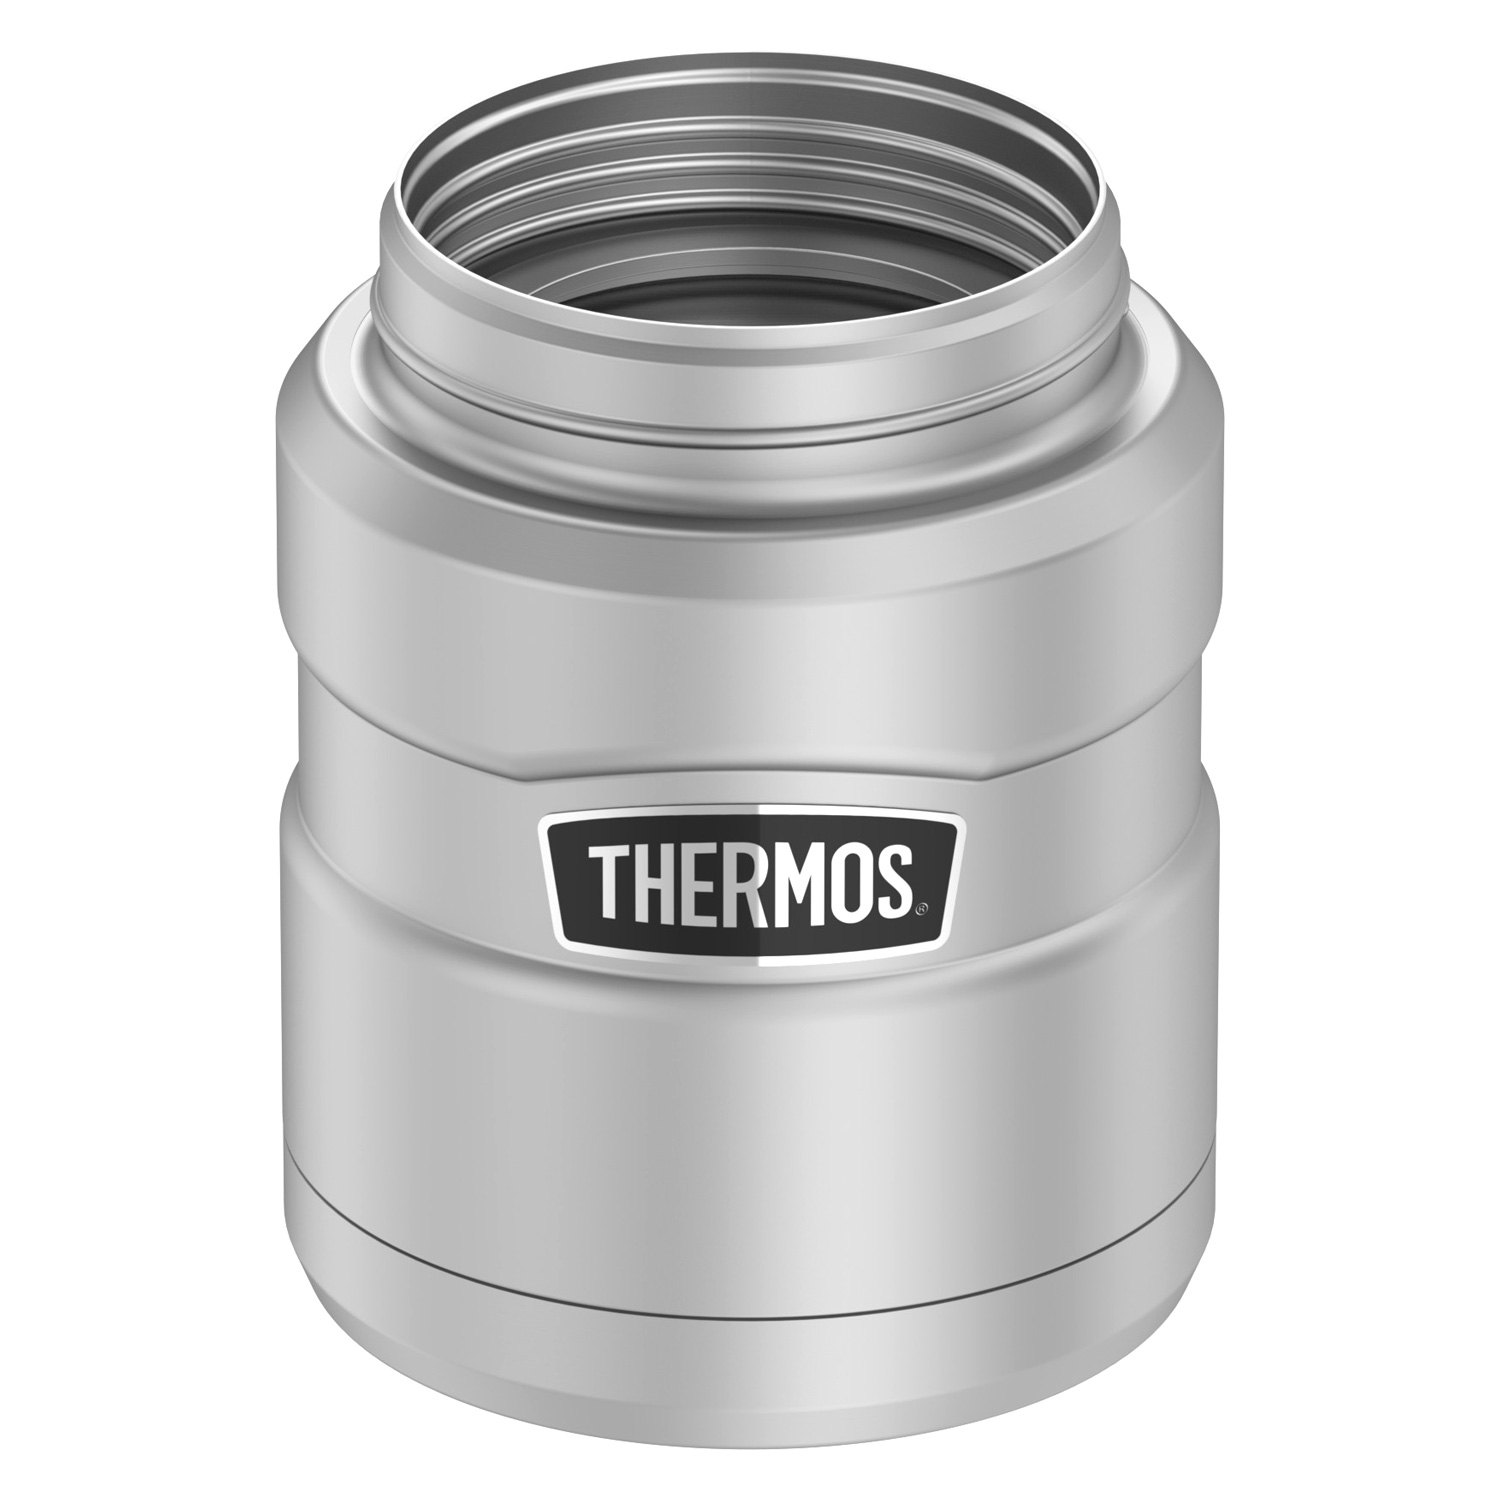 https://images.recreationid.com/thermos/items/sk3000mstri4-6.jpg